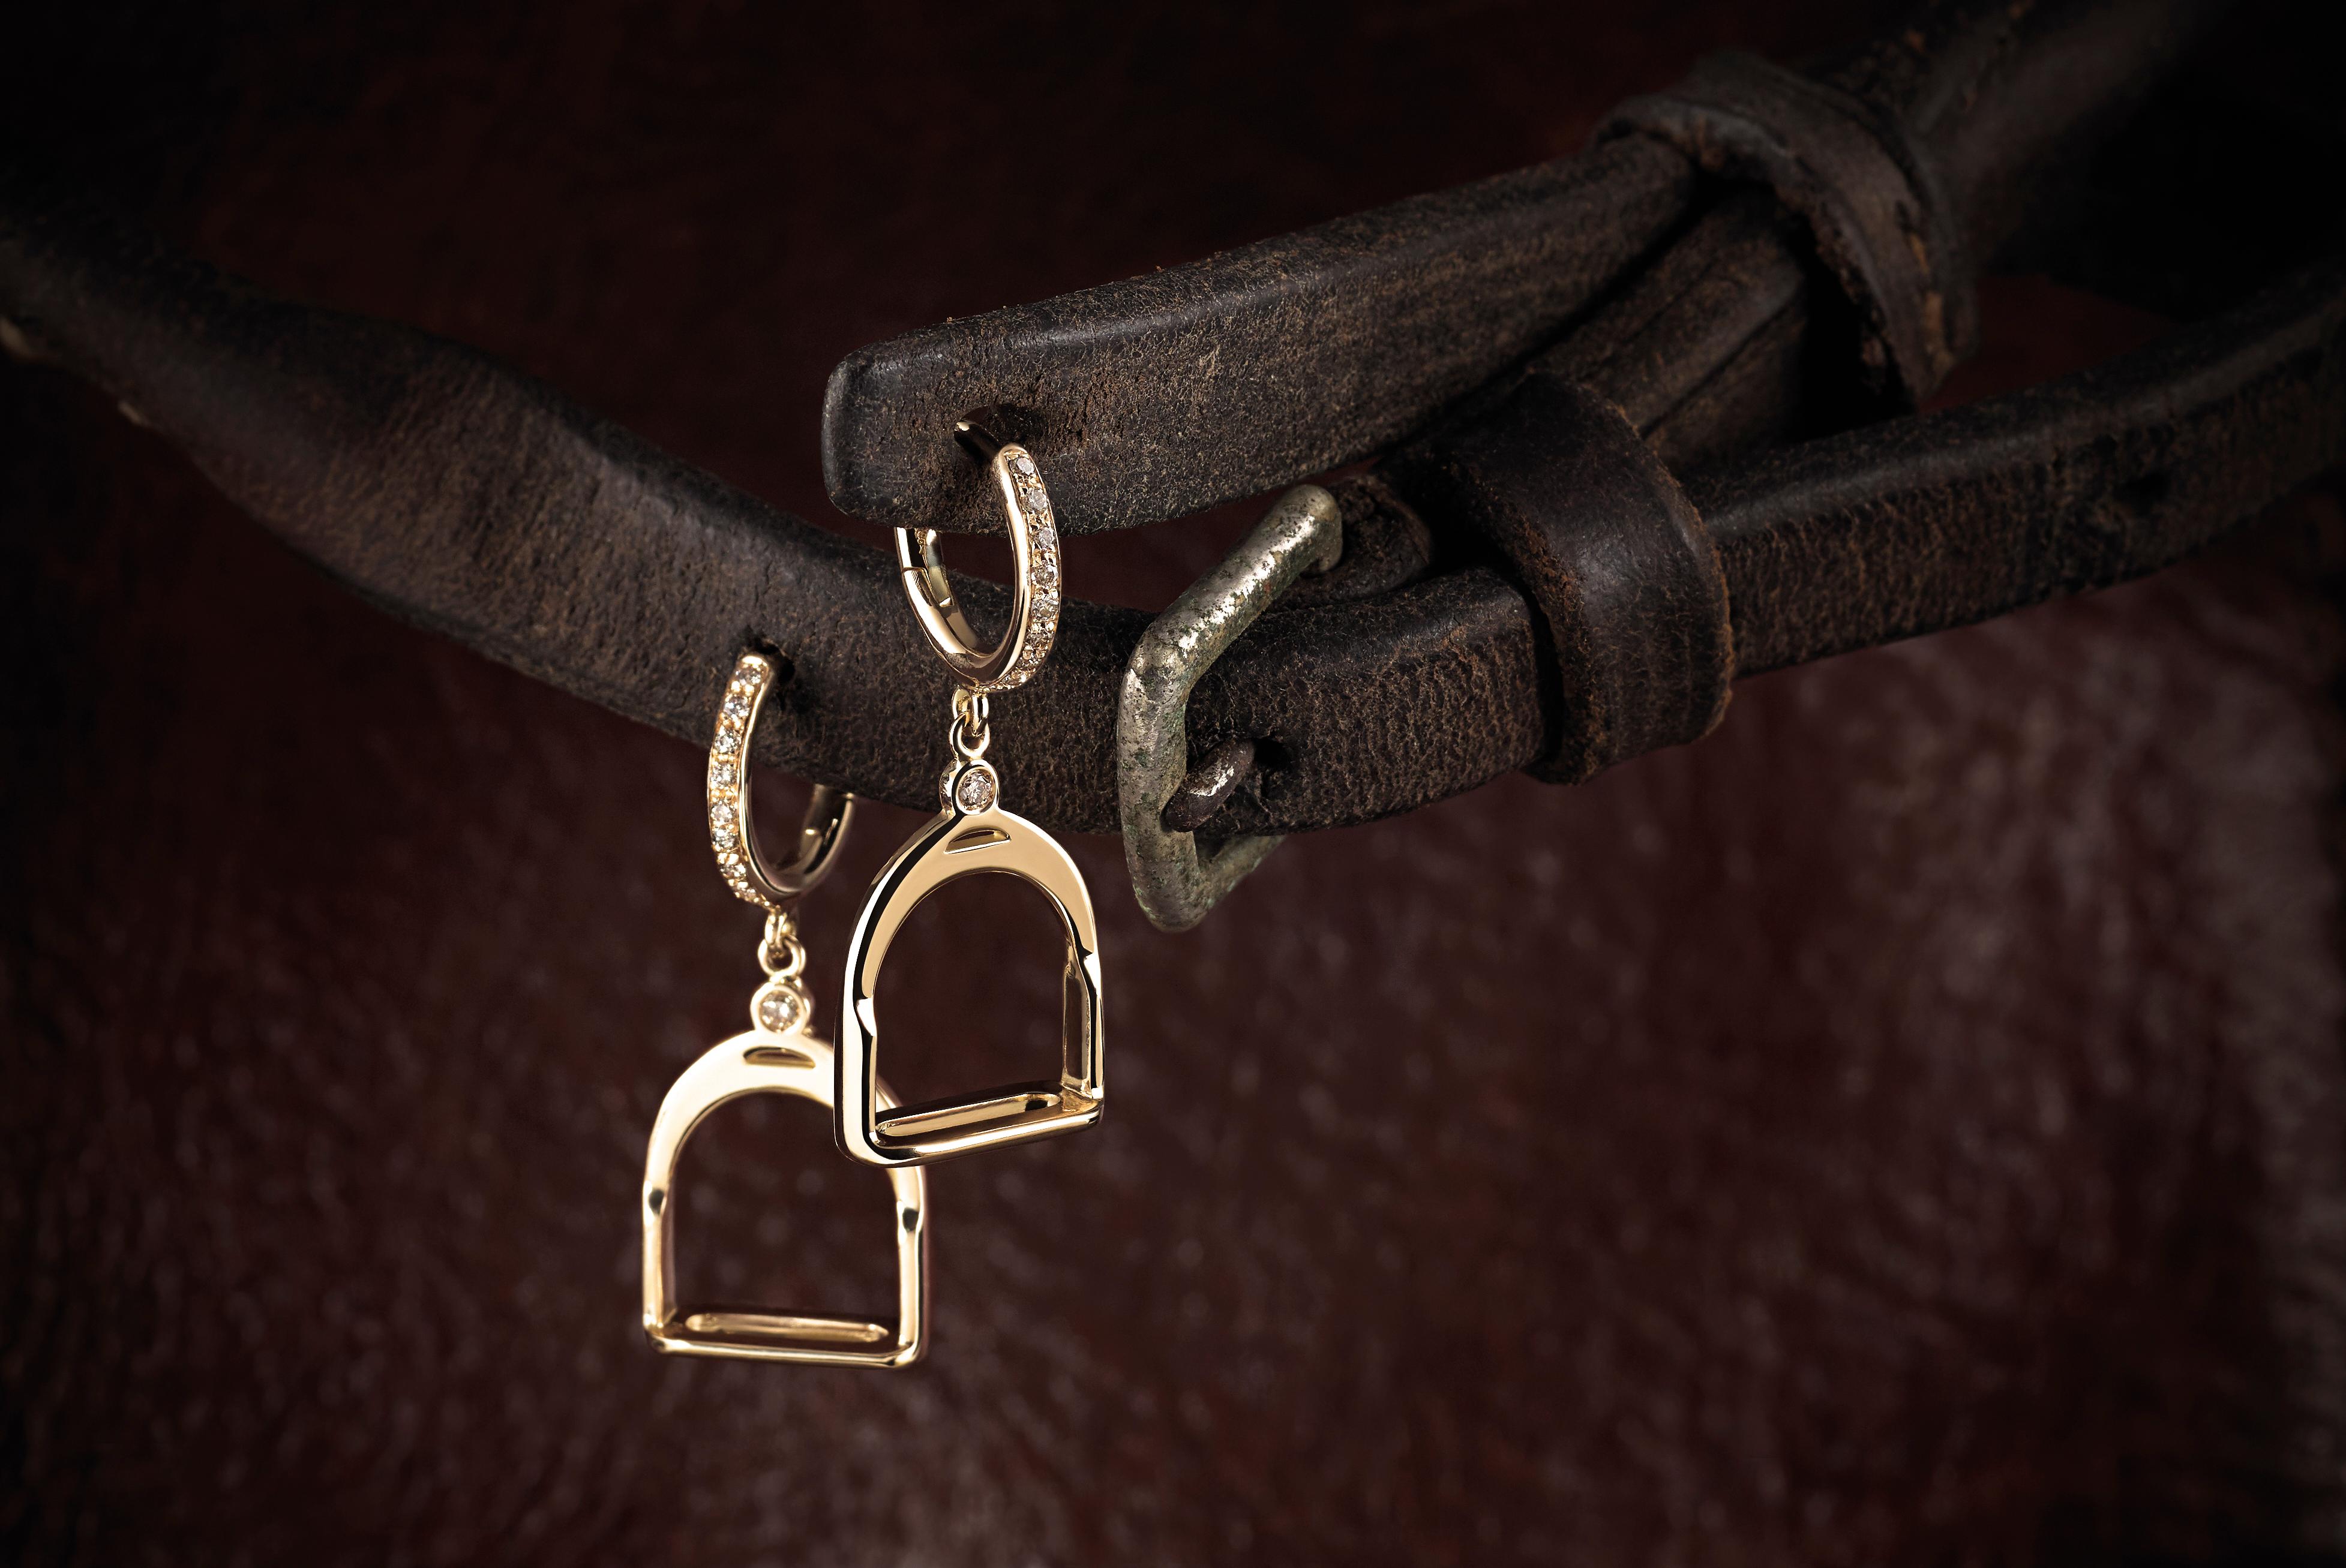 Garavelli 18 Karat Yellow Gold  Dangling Earrings from Staffe Collection, featuring brown diamonds accents. Made in Valenza, Italy
Each stirrup is 15 mm tall and have one brown diamond.
Total earrings length mm 25 
18kt YELLOW GOLD  : gr